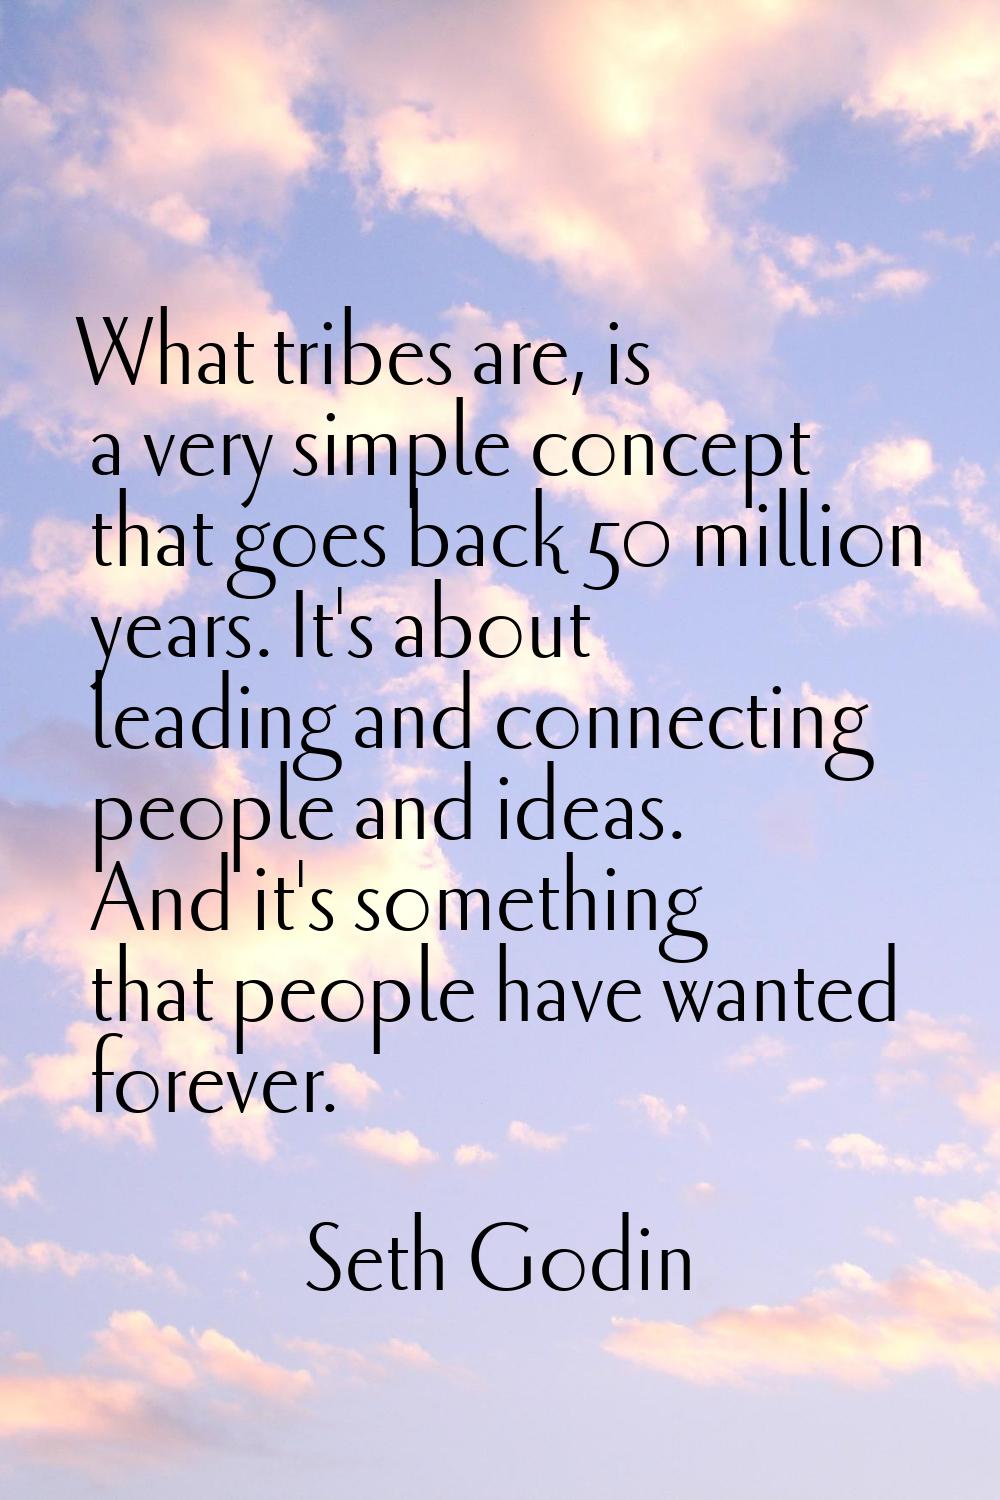 What tribes are, is a very simple concept that goes back 50 million years. It's about leading and c